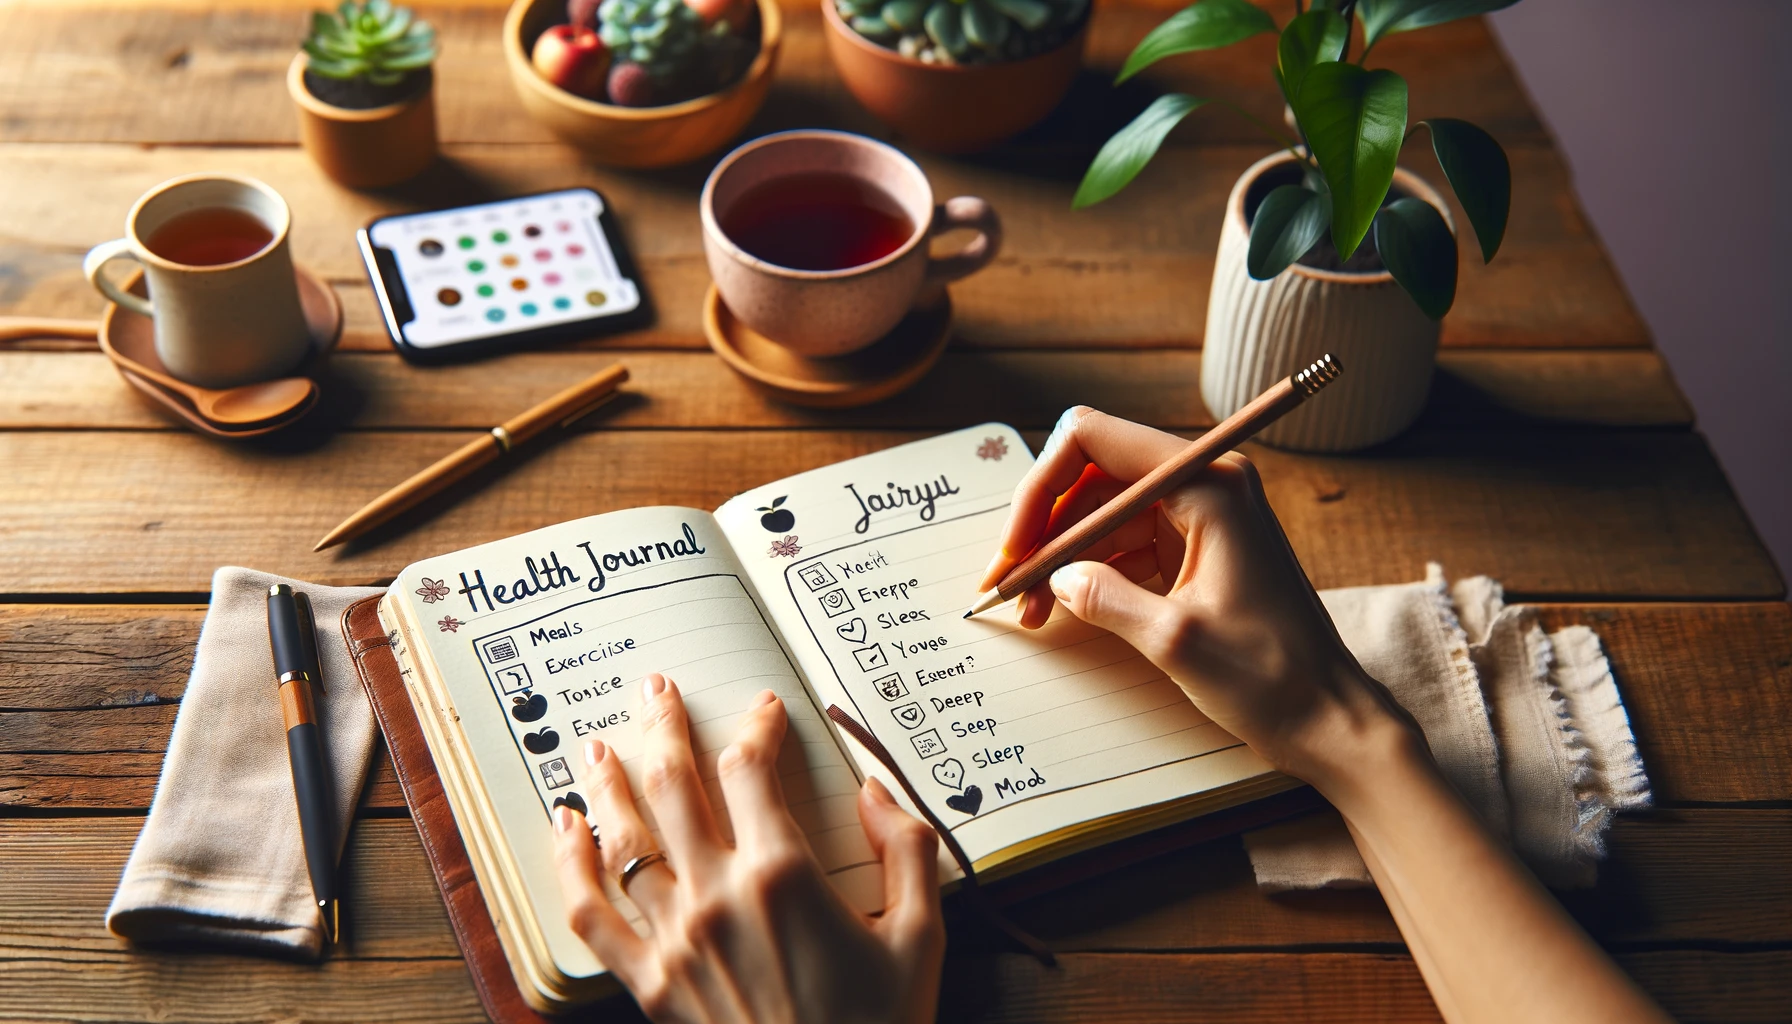 Hands writing in a health journal diary on a wooden desk with entries about meals, exercise, sleep, and mood. Nearby are a cup of tea, a potted plant, and a smartphone showing a fitness app.